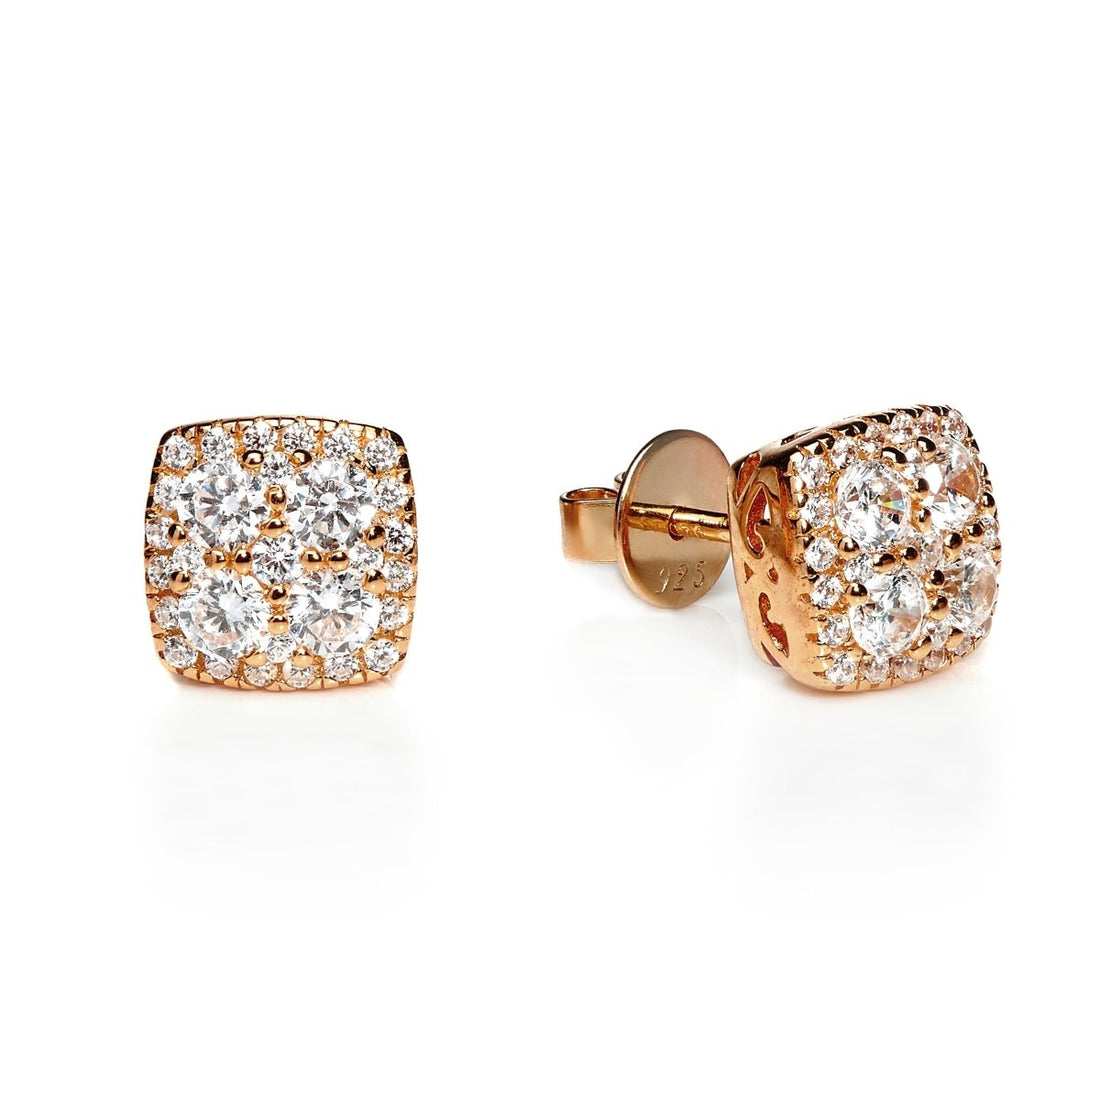 1.75ct Cubic Zirconia Square Cluster Stud Earrings in 14k Rose Gold Plated Silver